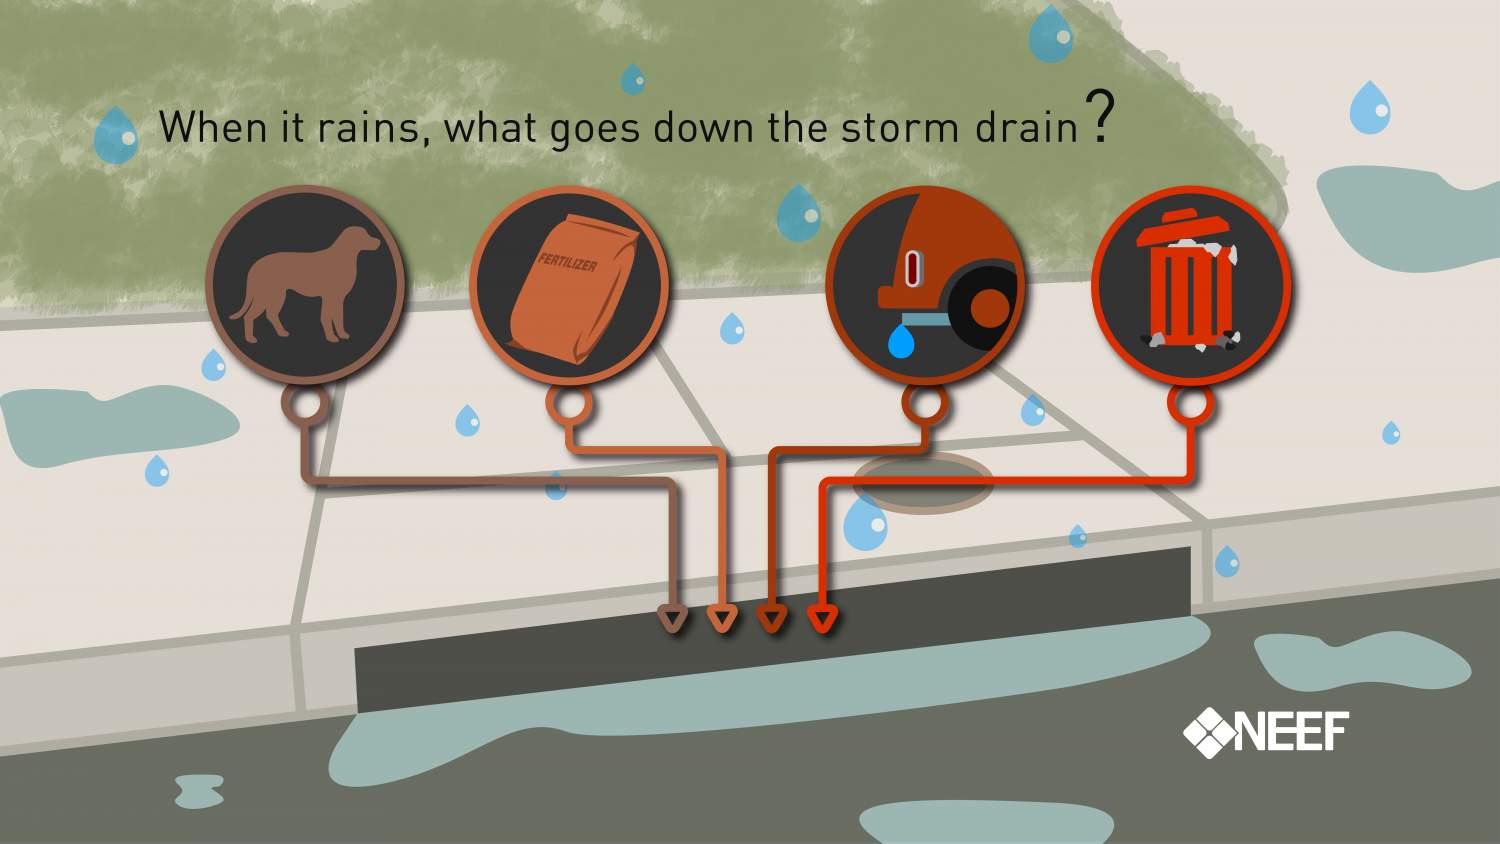 When it rains, what goes down the storm drain?